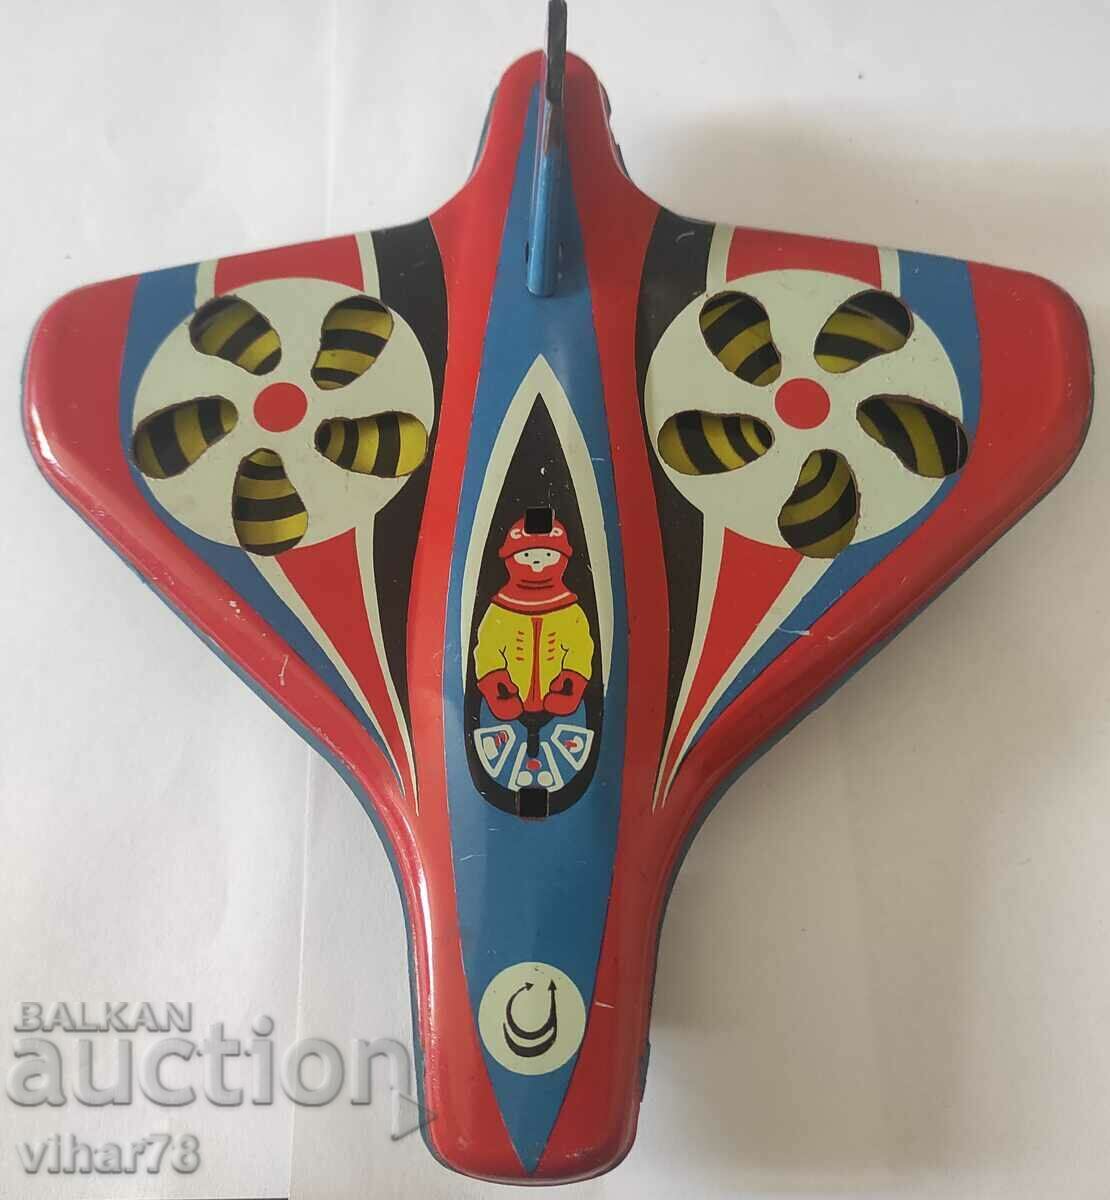 Old toy airplane